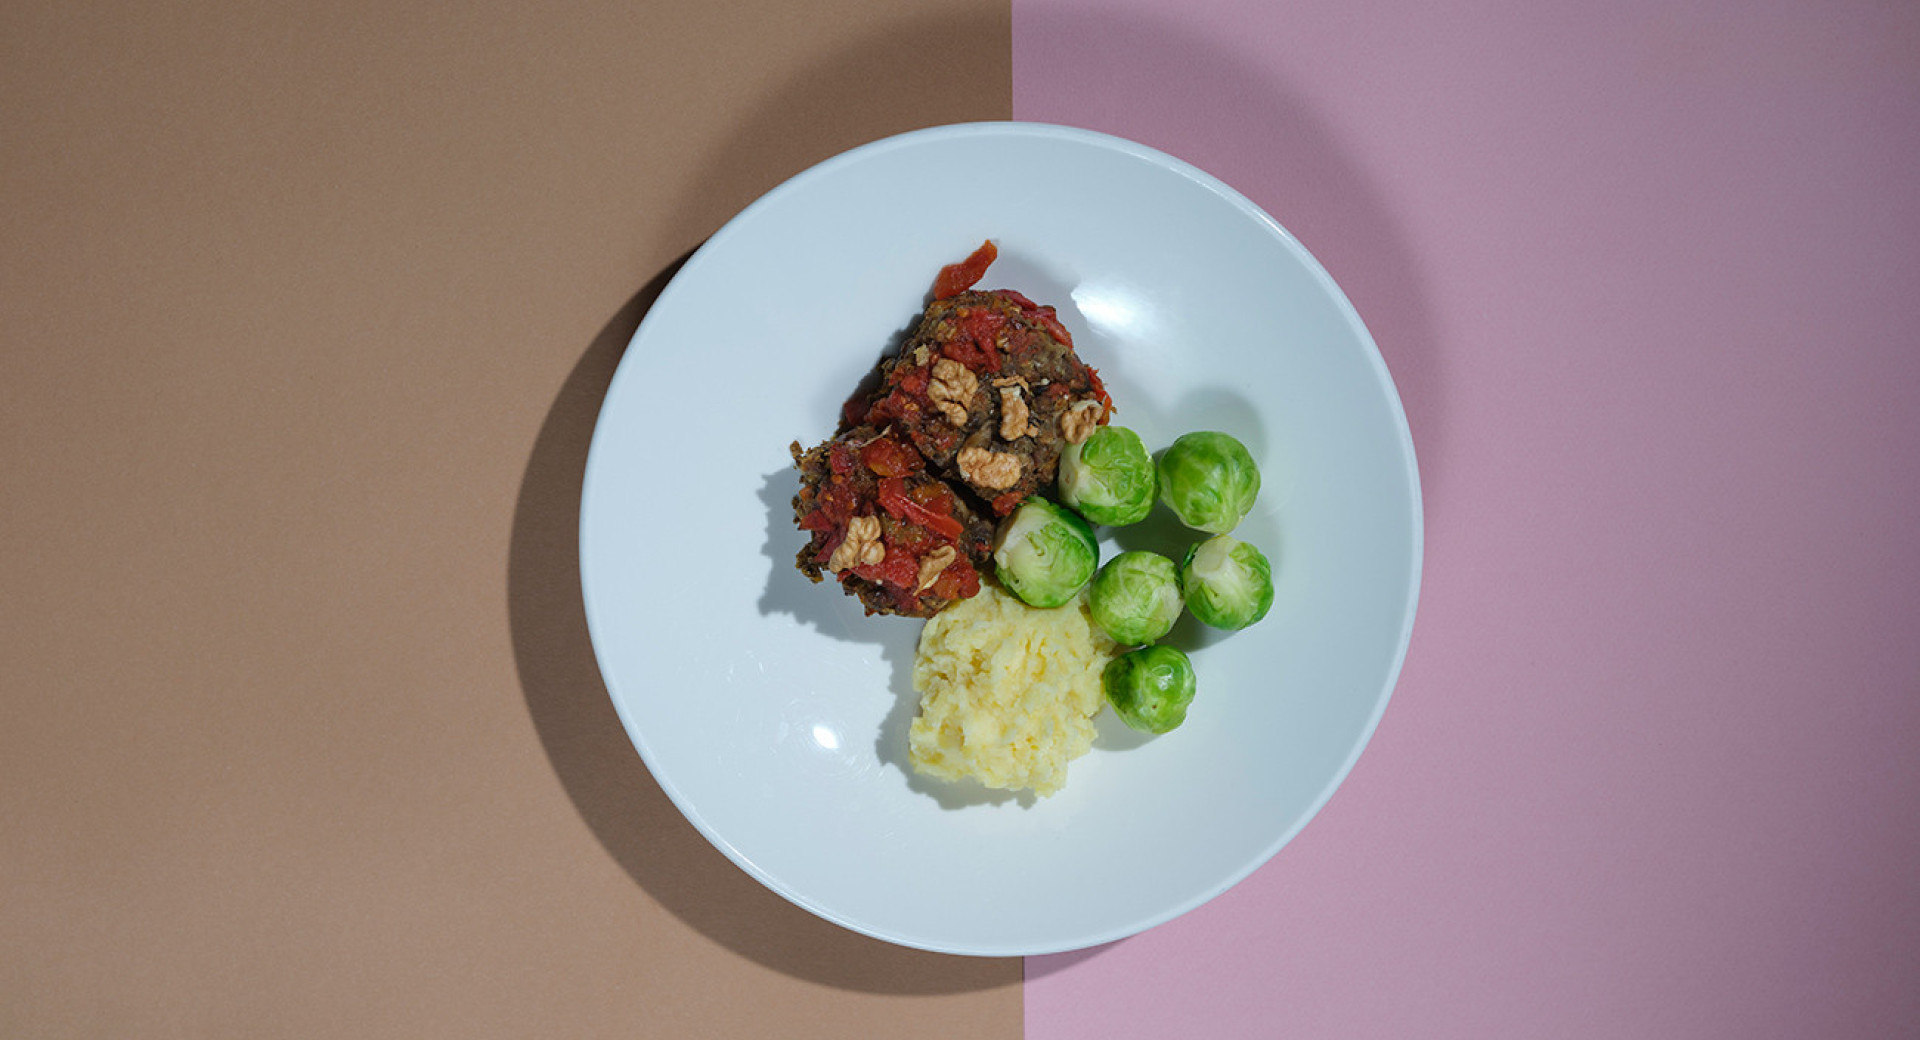 A white plate on a brown and pink base. On the plate, there is a neatly arranged roast with lentils and walnuts, alongside Brussels sprouts and mashed potatoes.